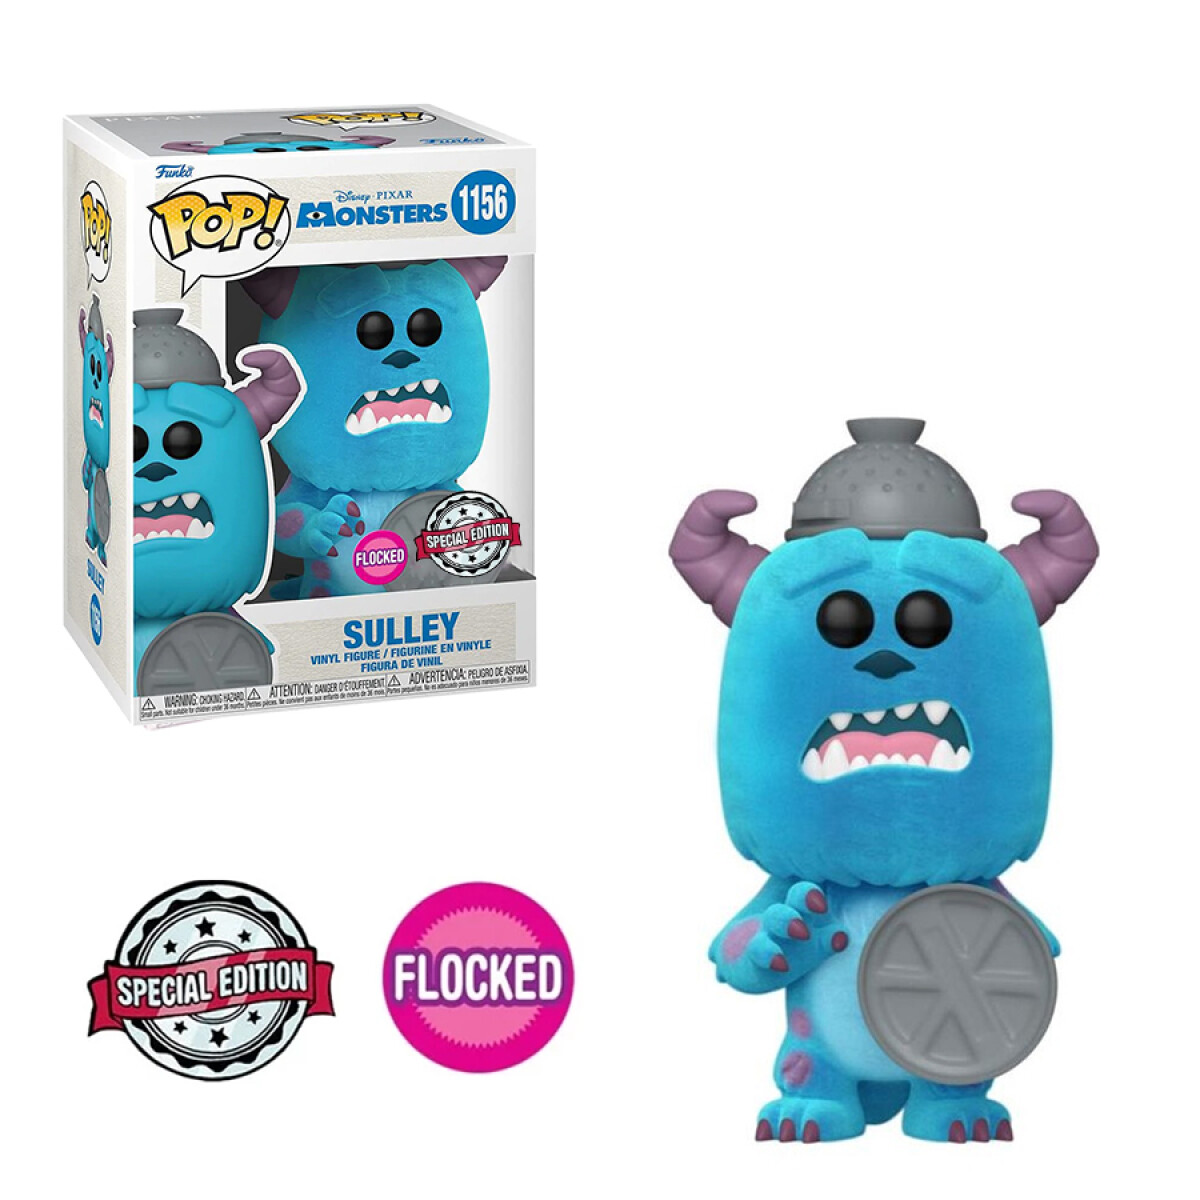 Sulley (with Lid) • Monsters University [Exclusivo - Flocked] - 1156 